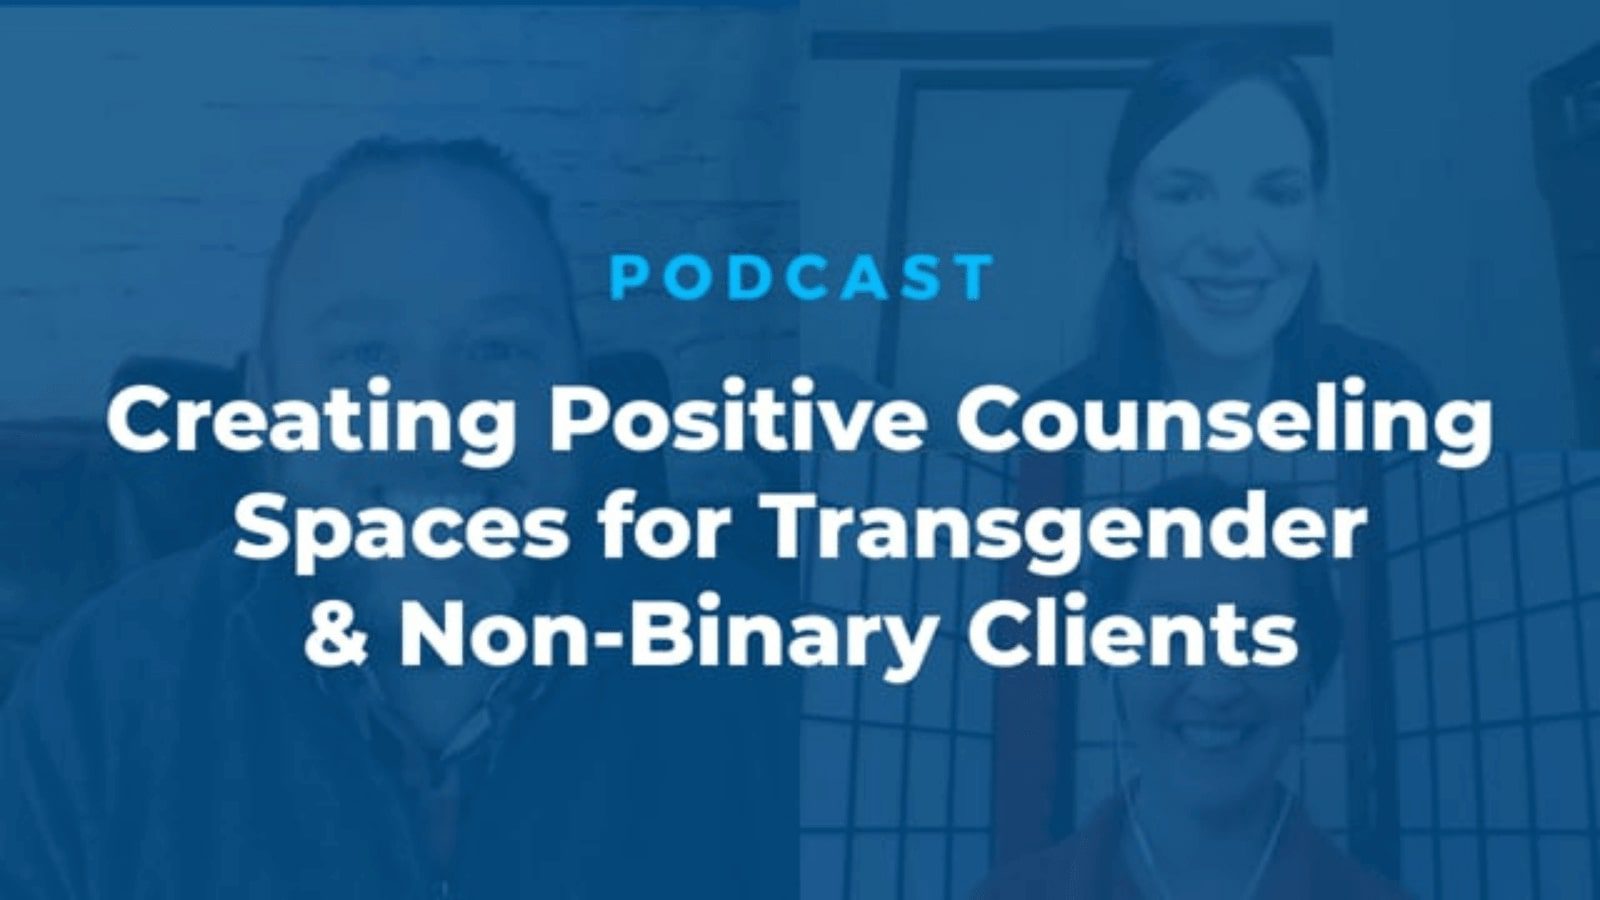 Creating positive counseling spaces for transgender & non-binary clients video thumbnail